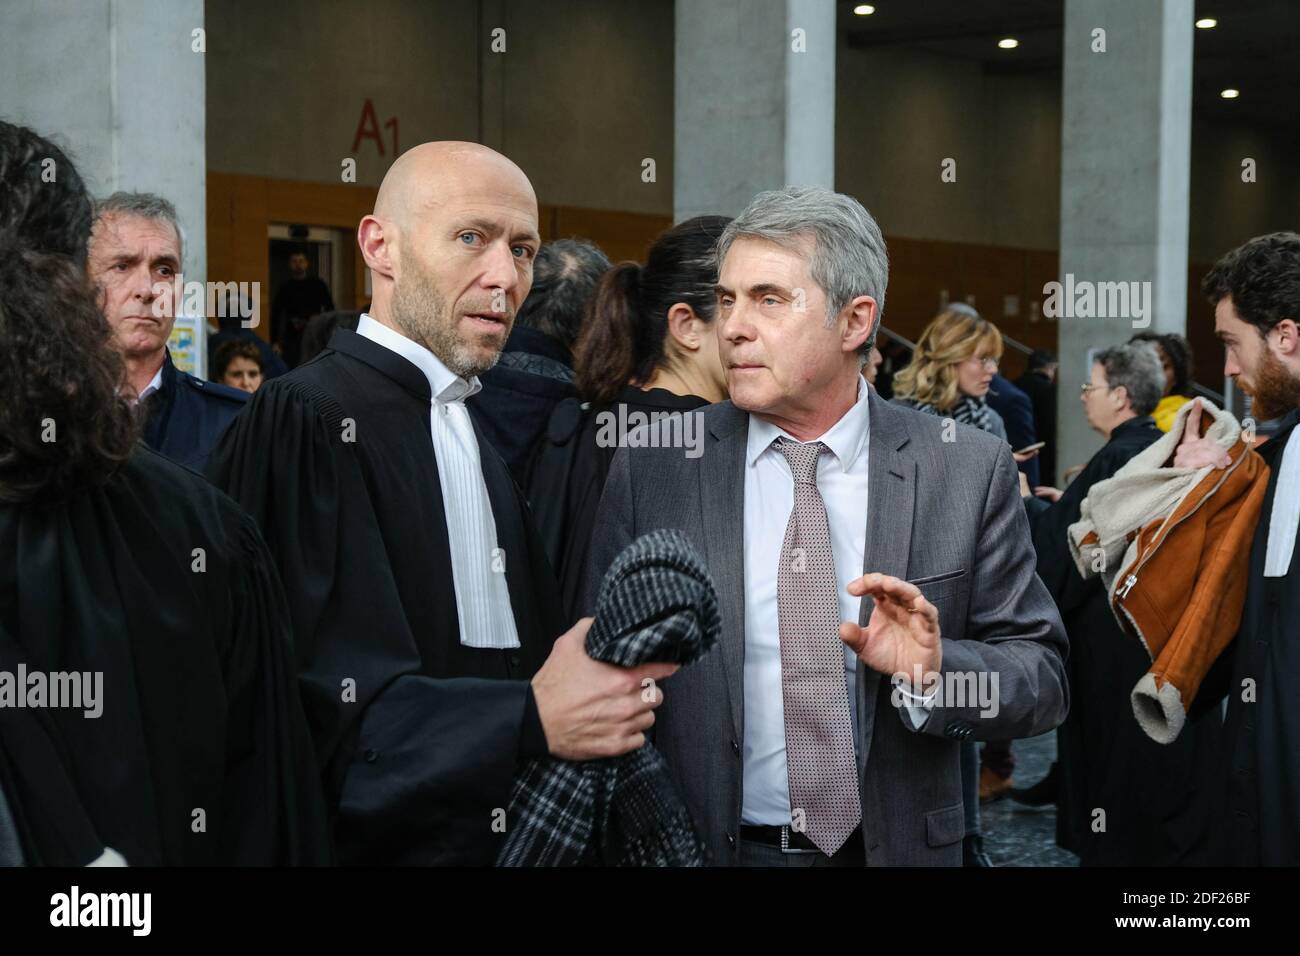 Manuel FURET, President of the Toulouse Bar during demonstration of lawyers  in front of the Palais de Justice in Toulouse, France on February 4, 2020.  They have been mobilized for several weeks